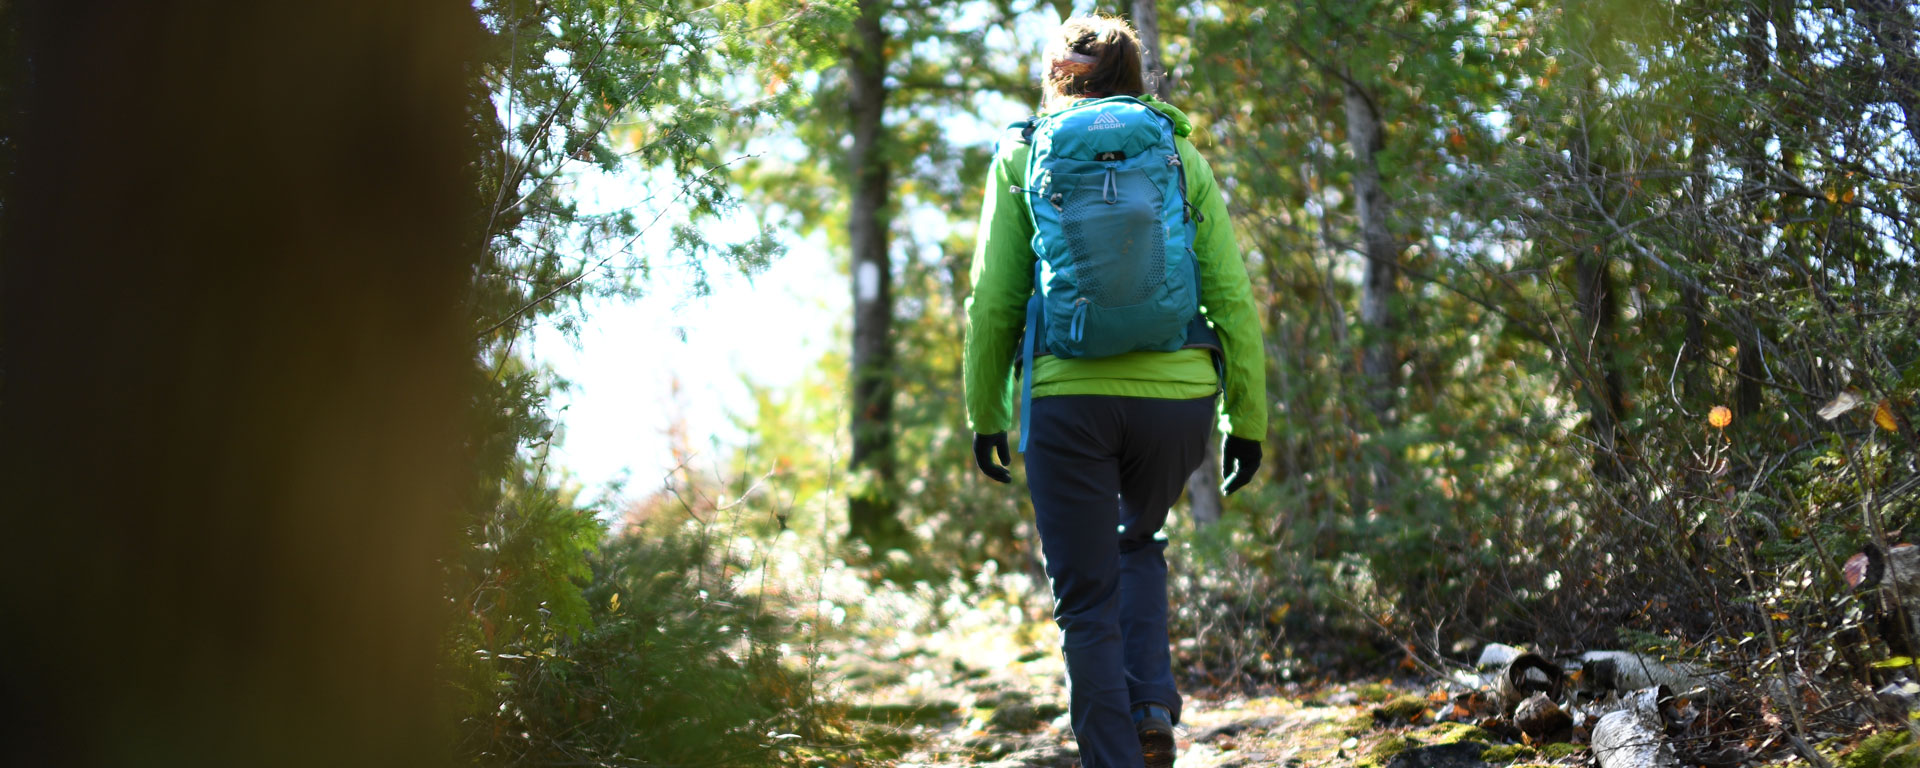 woman with a backpack on a hiking trail walking away from the camera